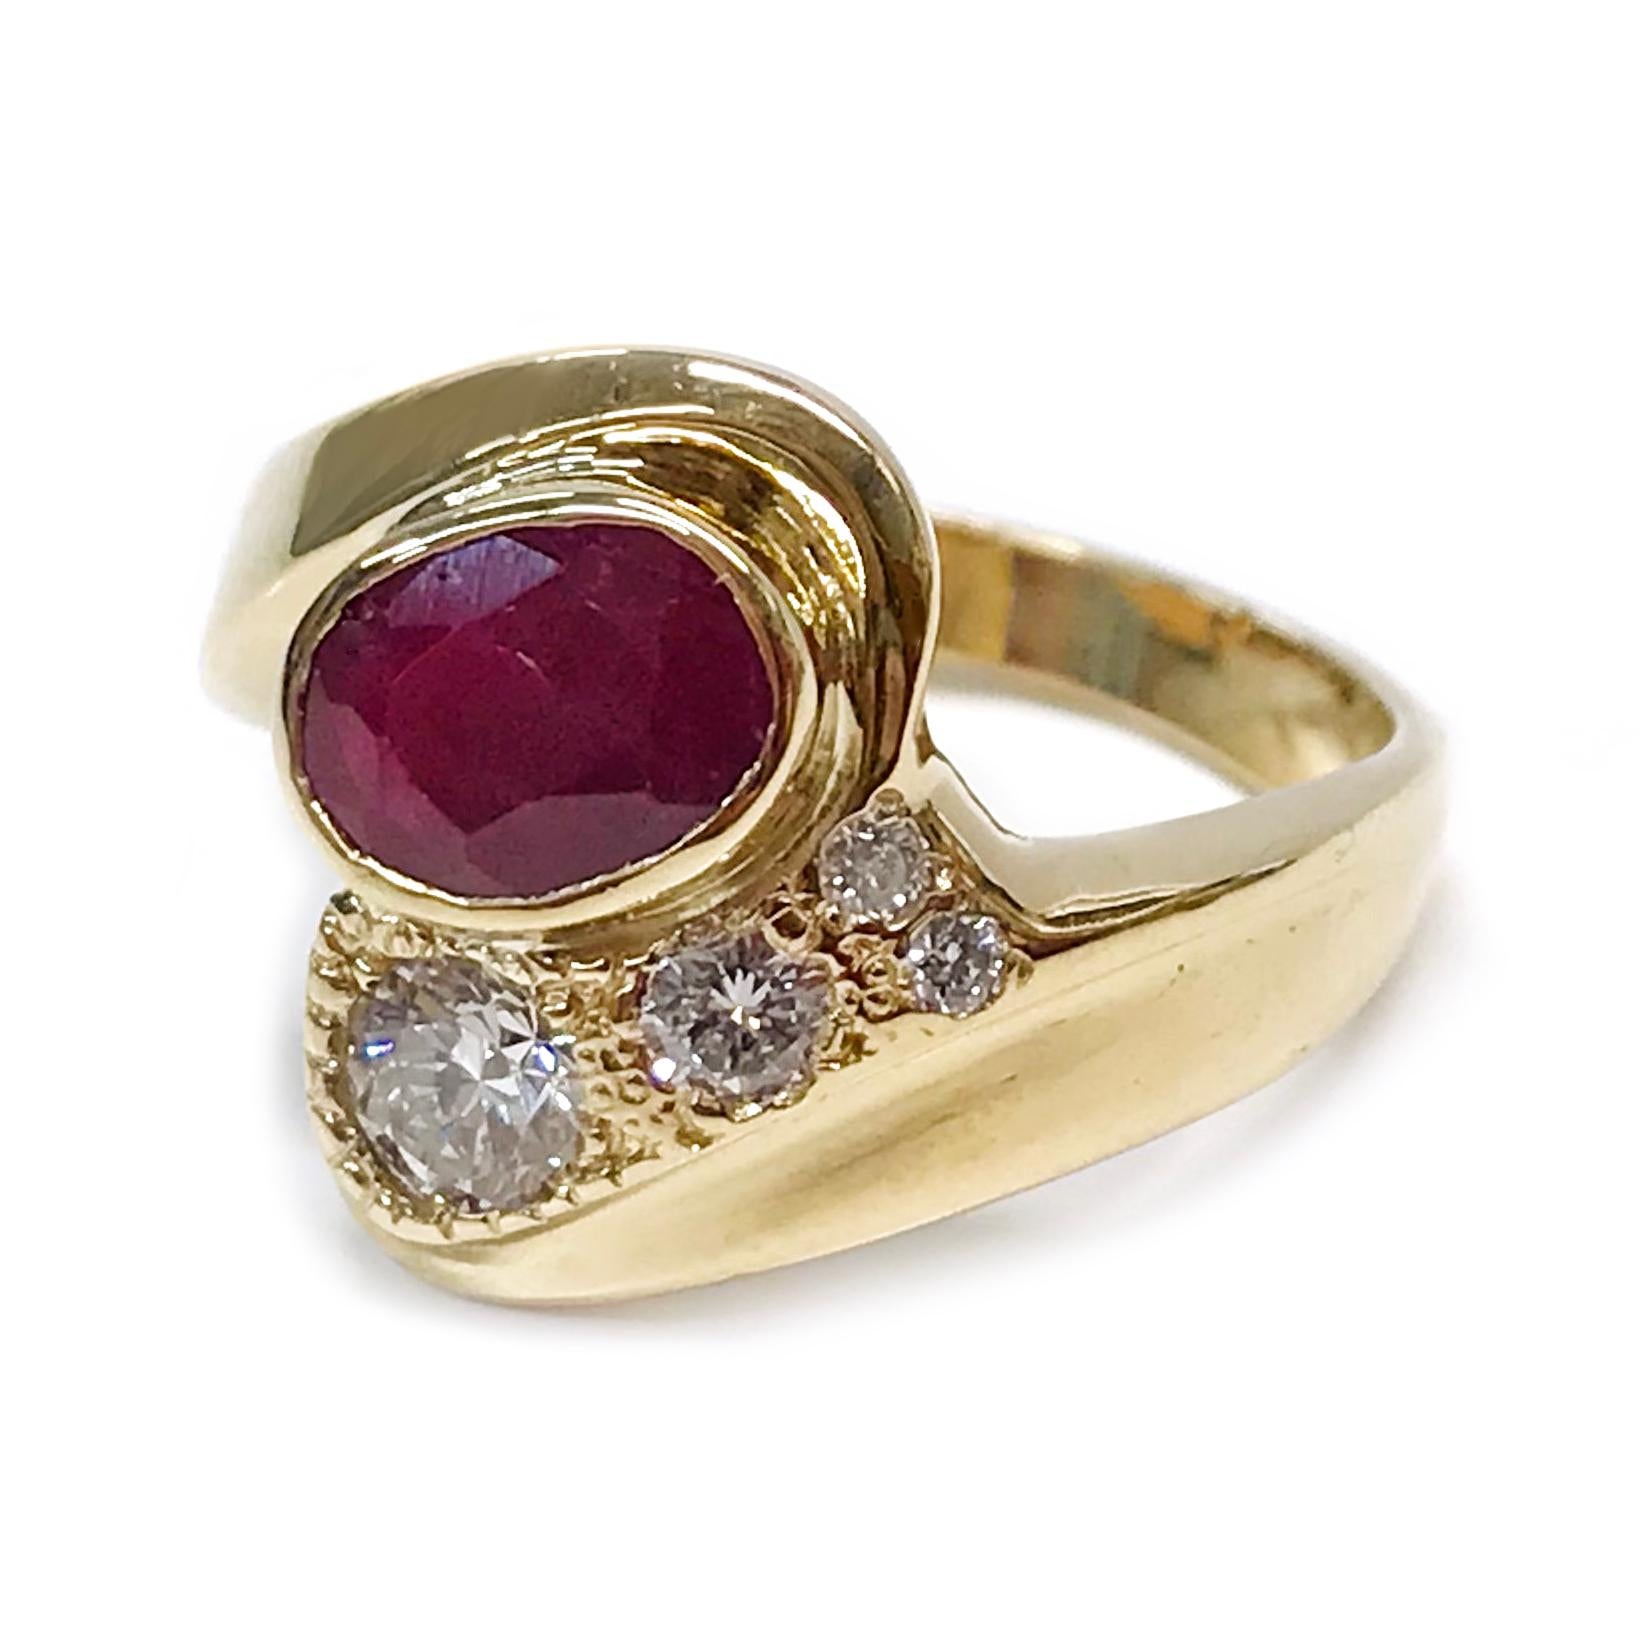 14 Karat Ruby Diamond Ring. The ring features a 7.8 x 6.8 x 3mm bezel-set oval Ruby, and four flush-set round diamonds set into two intersecting gold swooshes. The ruby has a carat weight of 1.39ct. The diamonds have a total weight of 0.47ctw. The